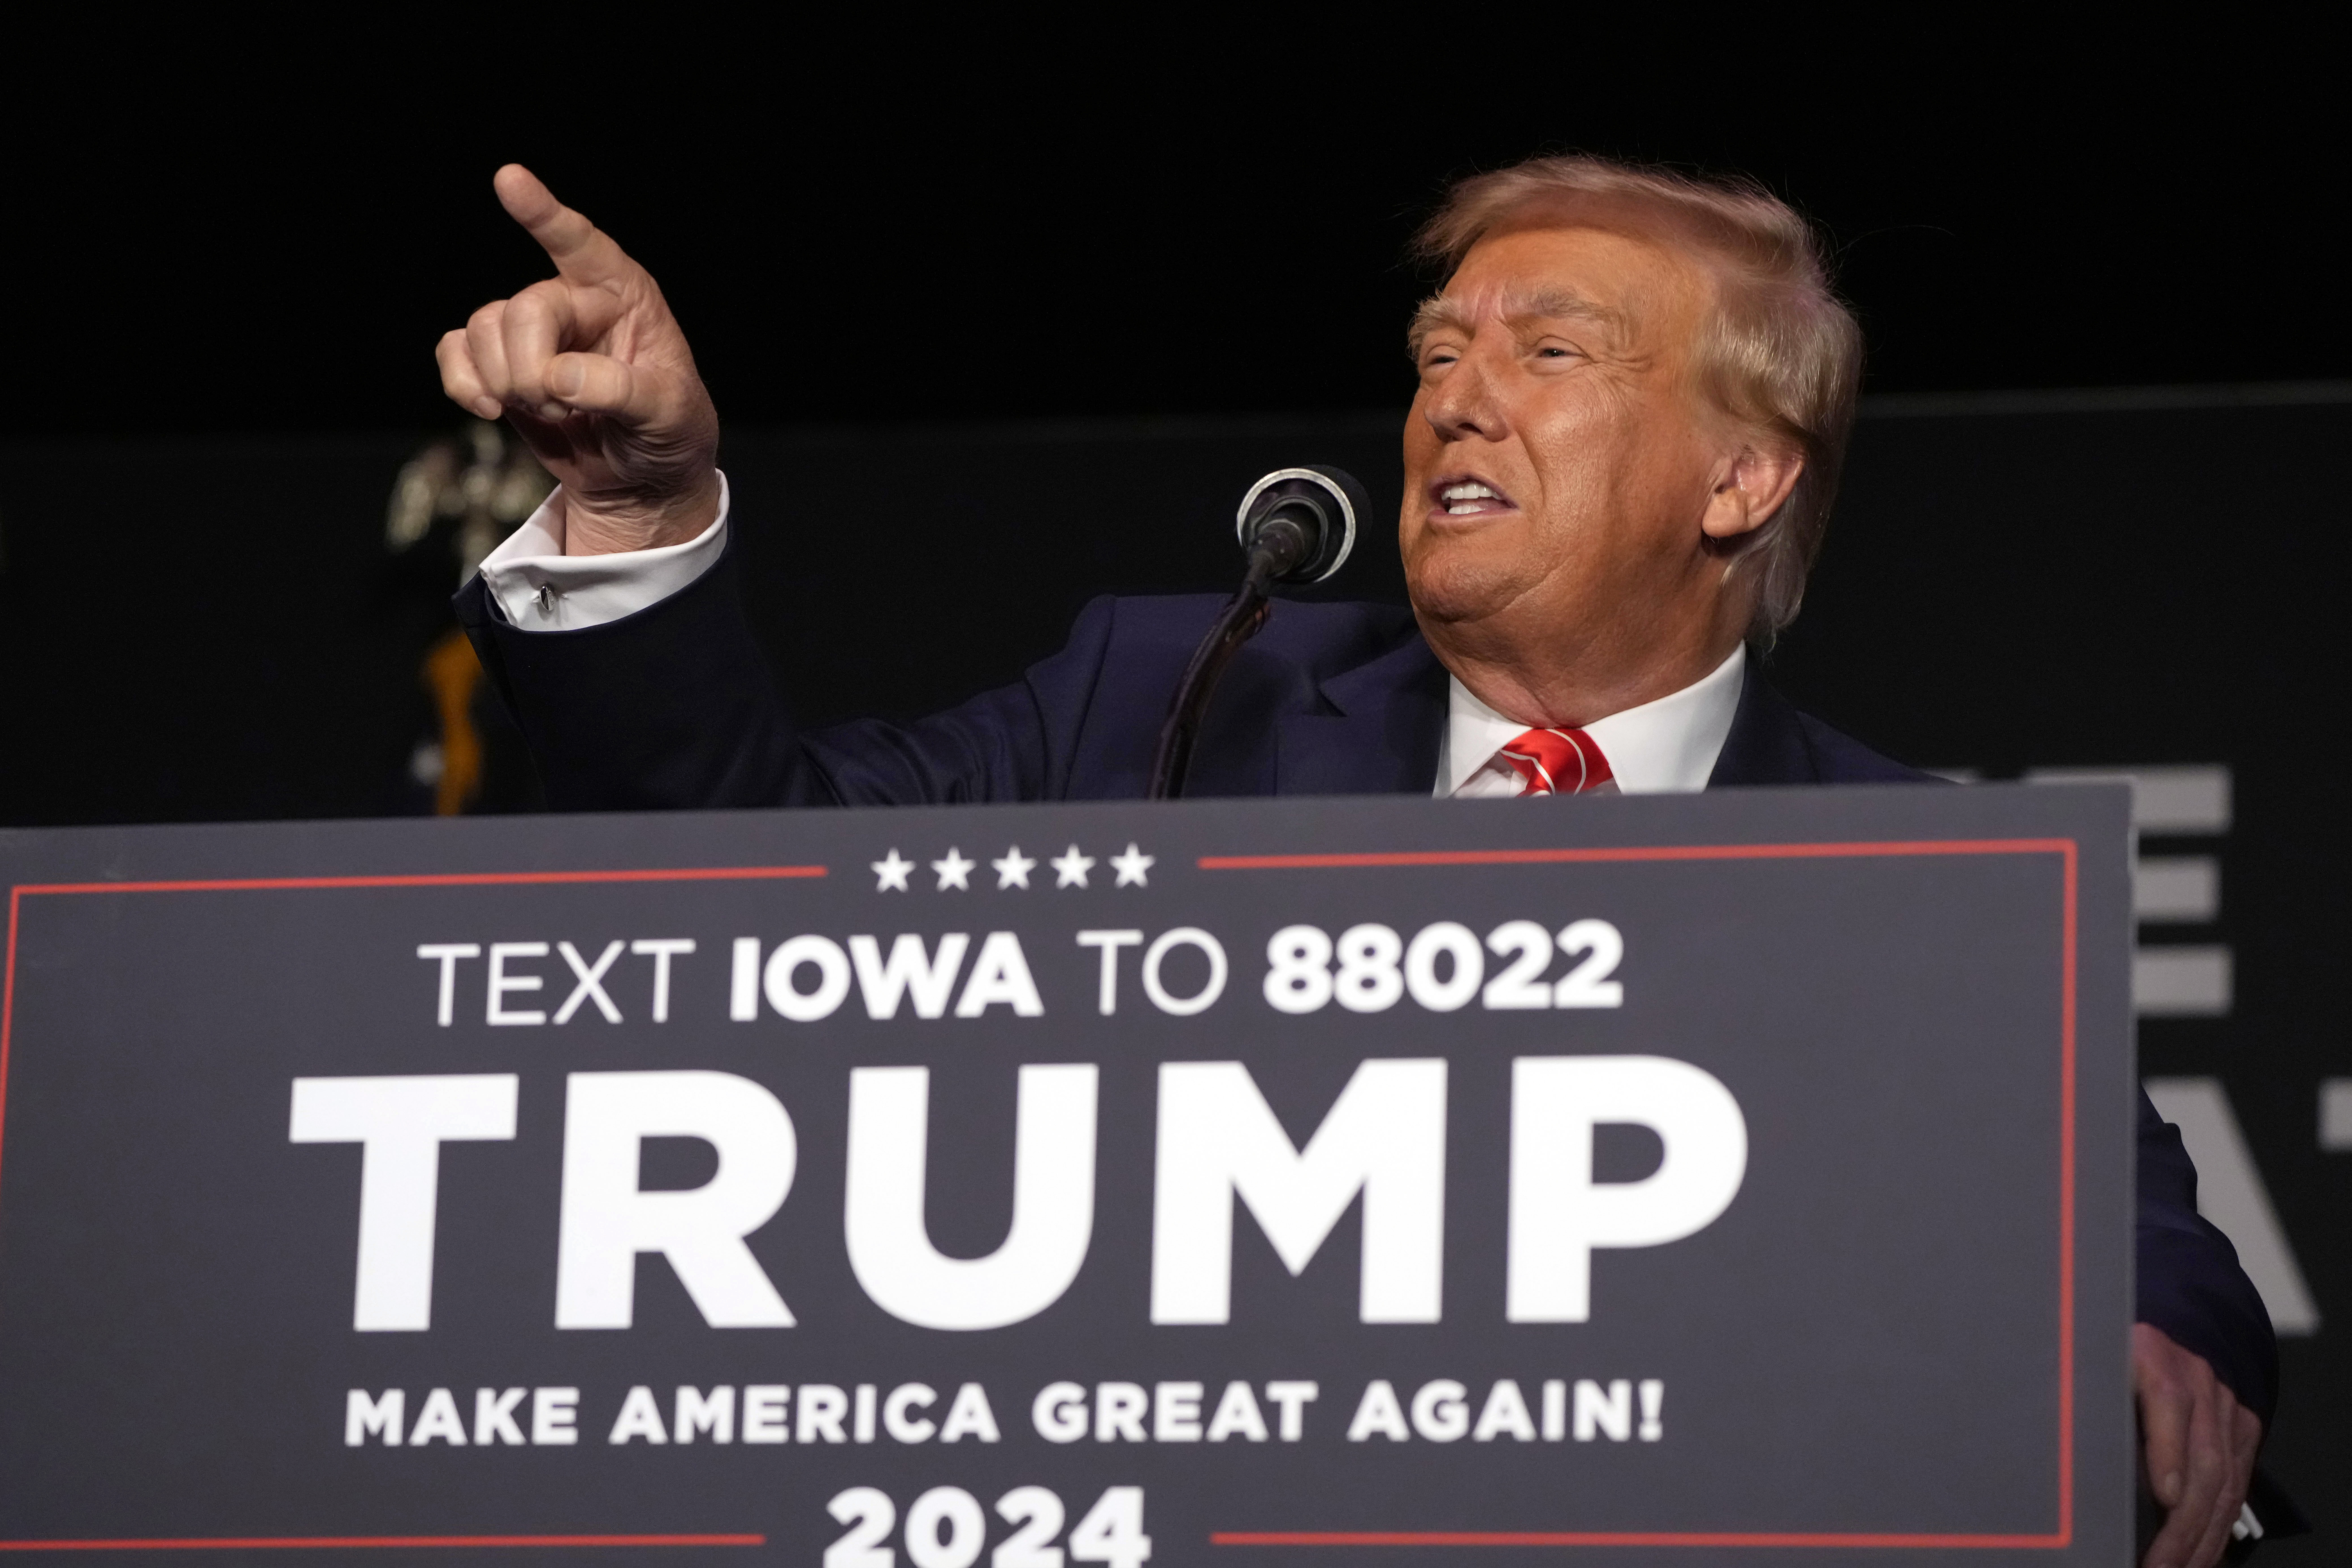 You think Biden can do that?': Trump mocks president in Iowa visit, US  News